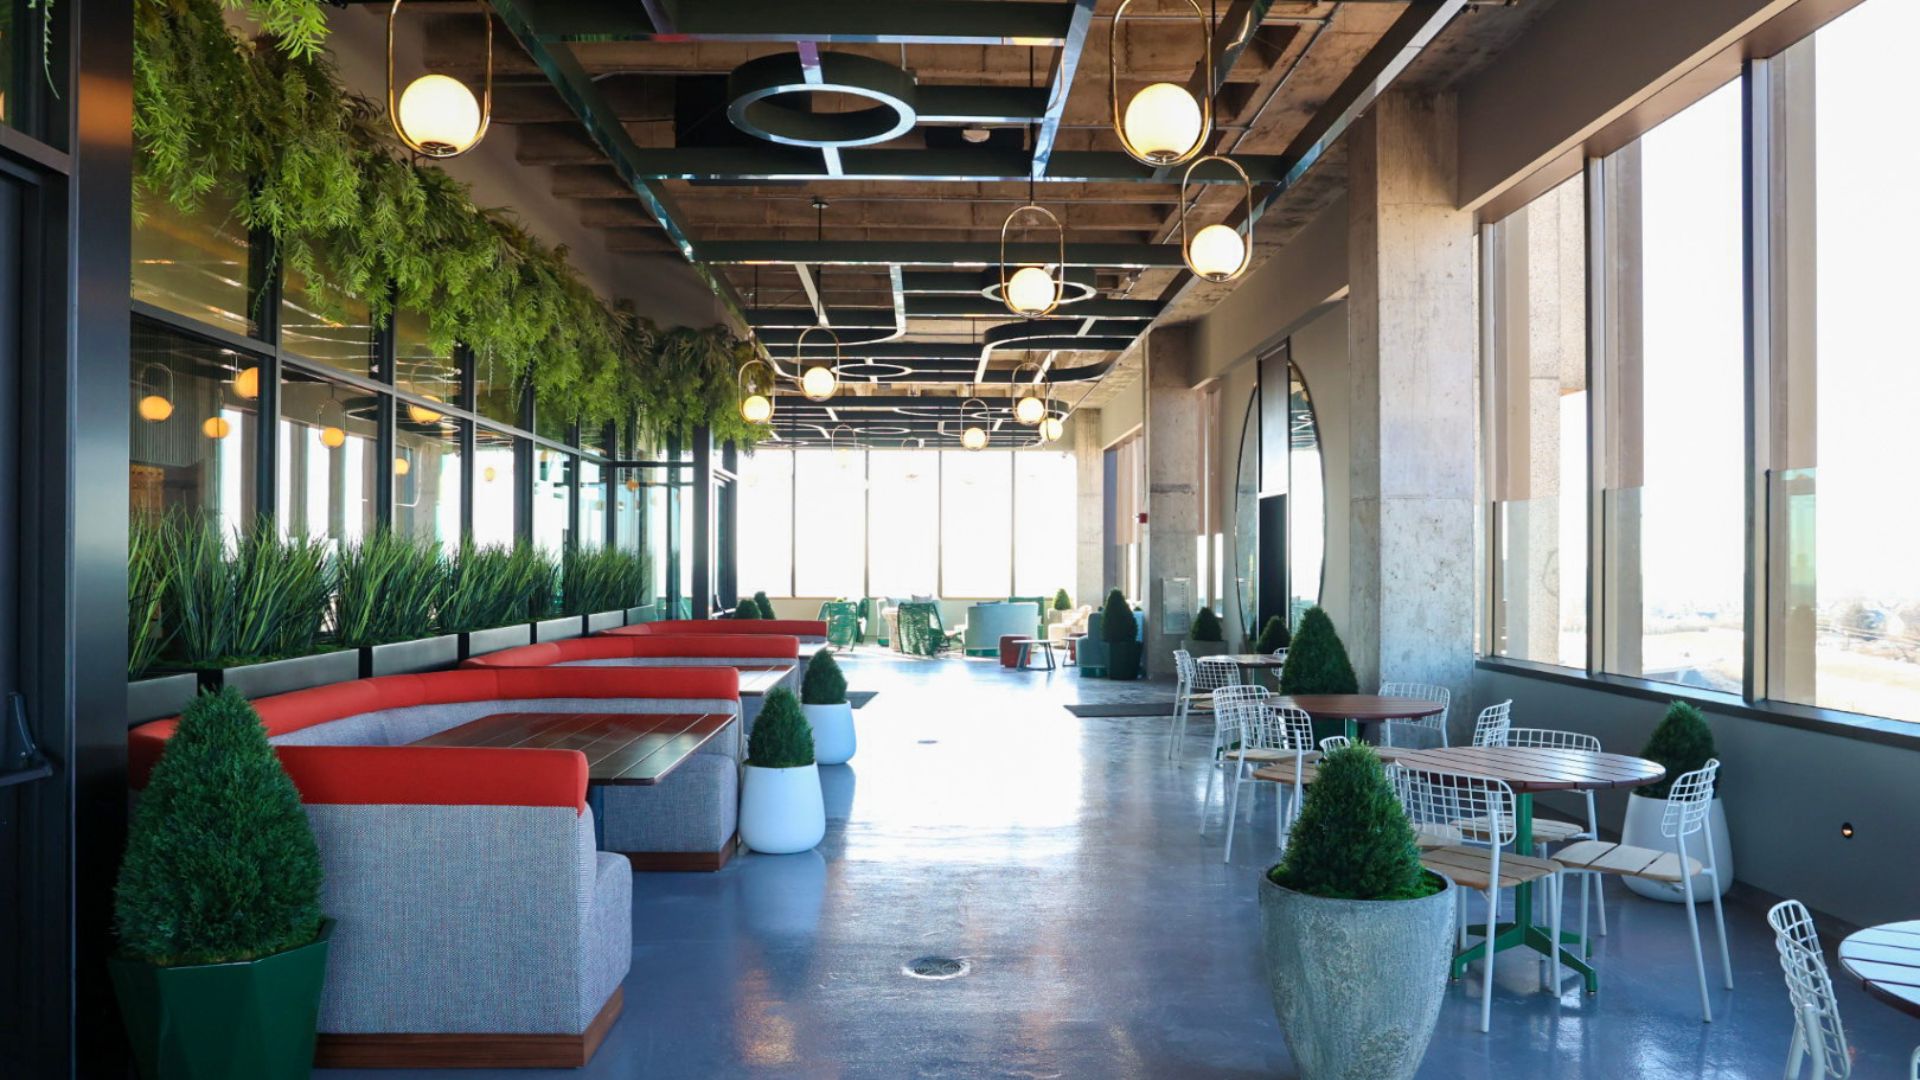 360 Westport has a gorgeous rooftop terrace with windows on all sides, firepits and various seating.